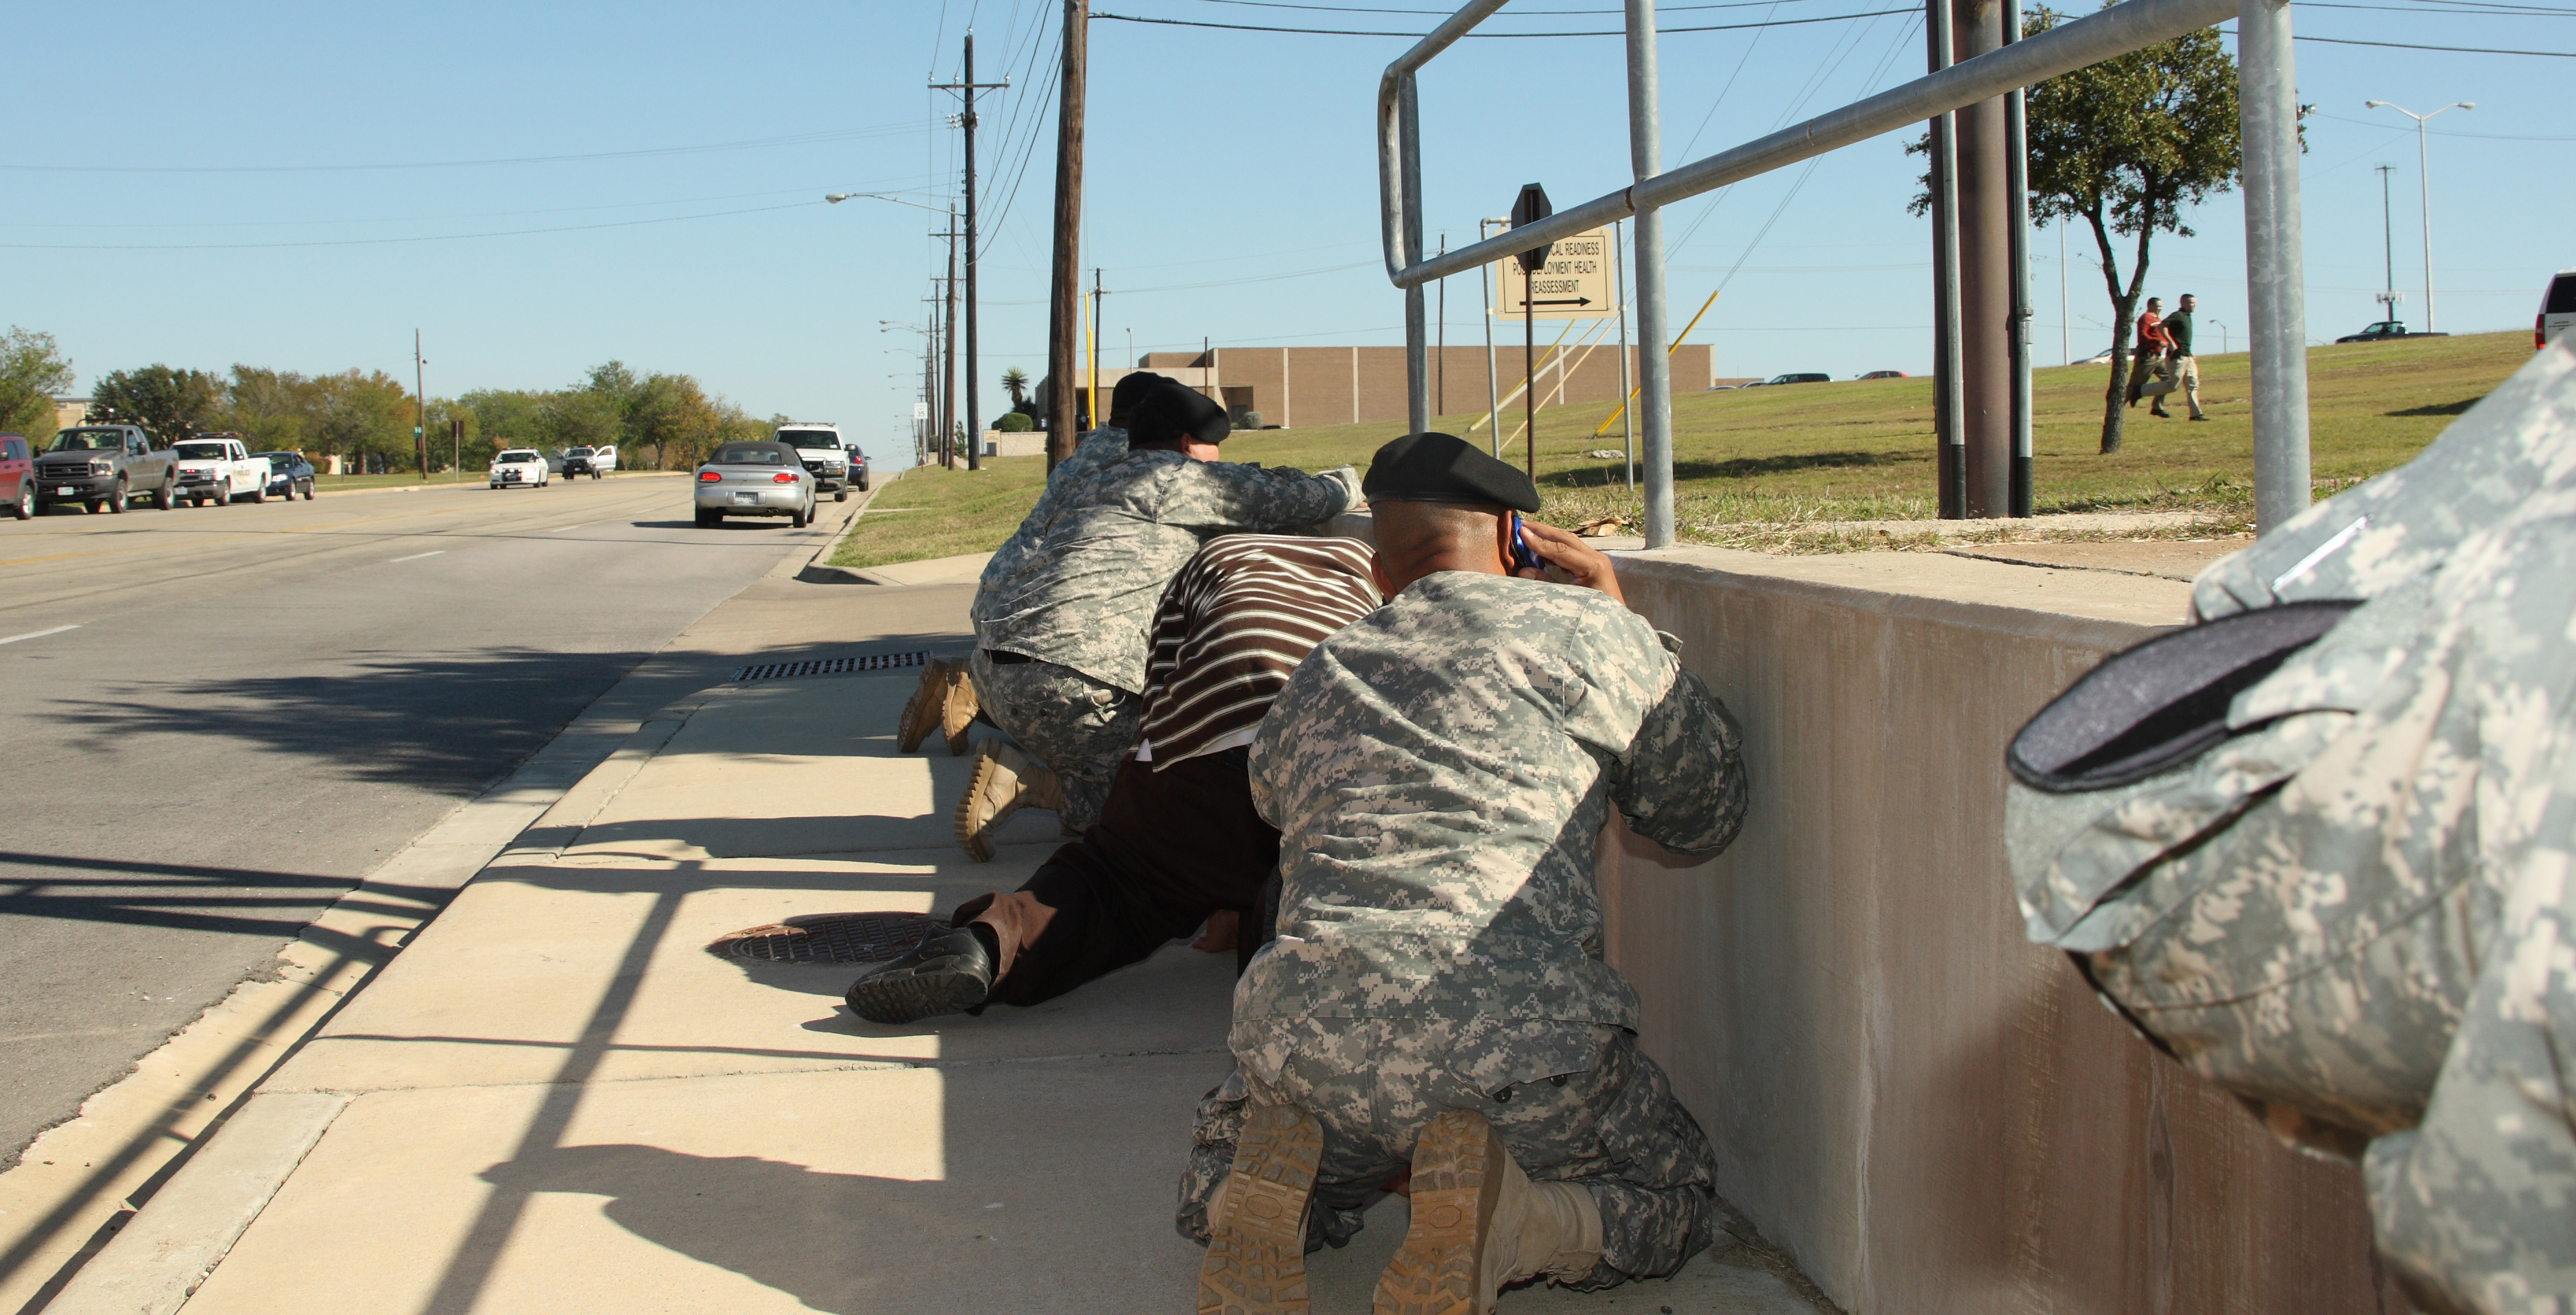 File:Flickr - The U.S. Army - Taking cover at Fort Hood.jpg ...